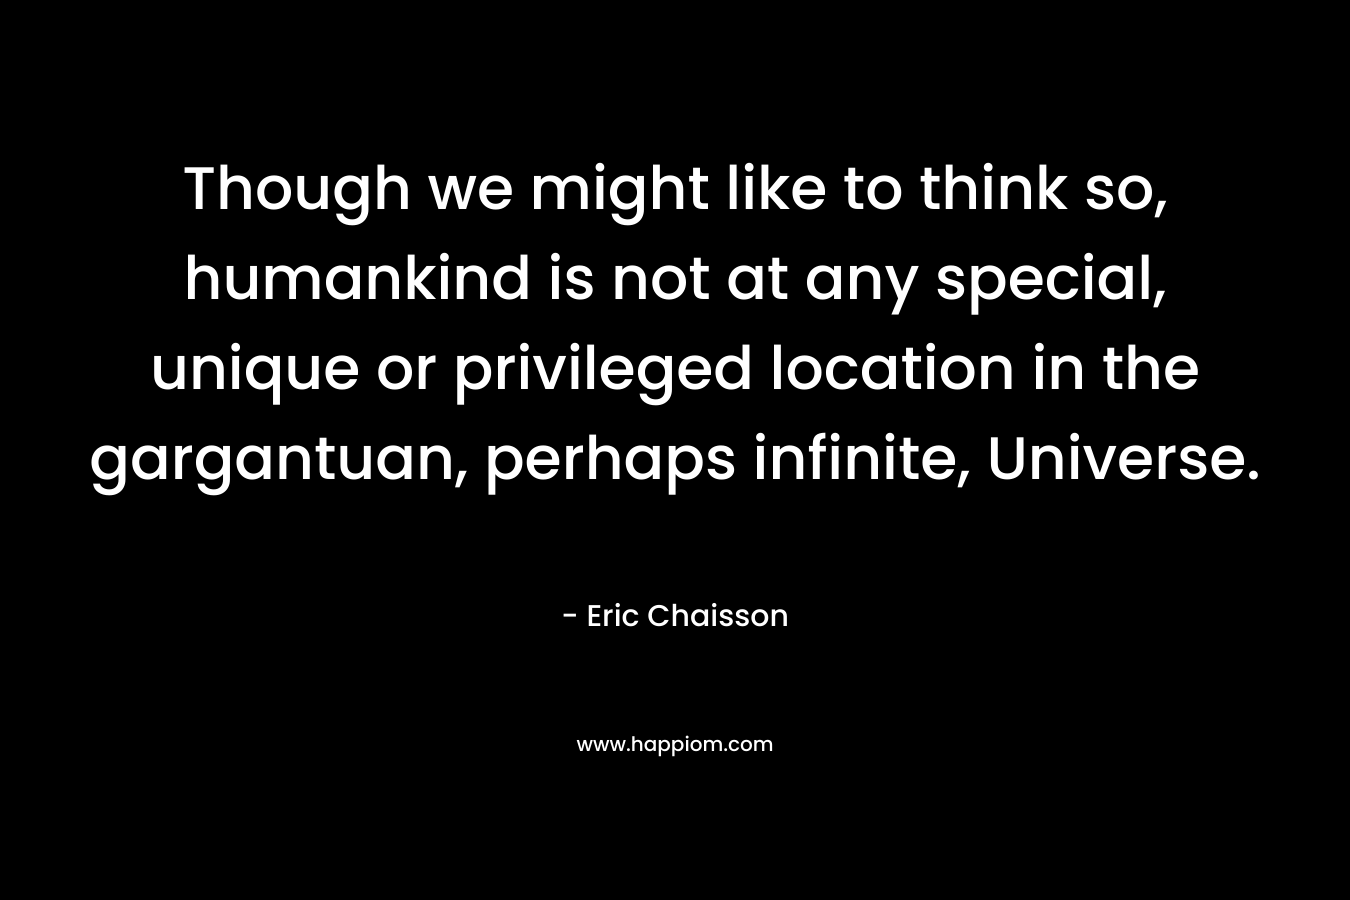 Though we might like to think so, humankind is not at any special, unique or privileged location in the gargantuan, perhaps infinite, Universe.